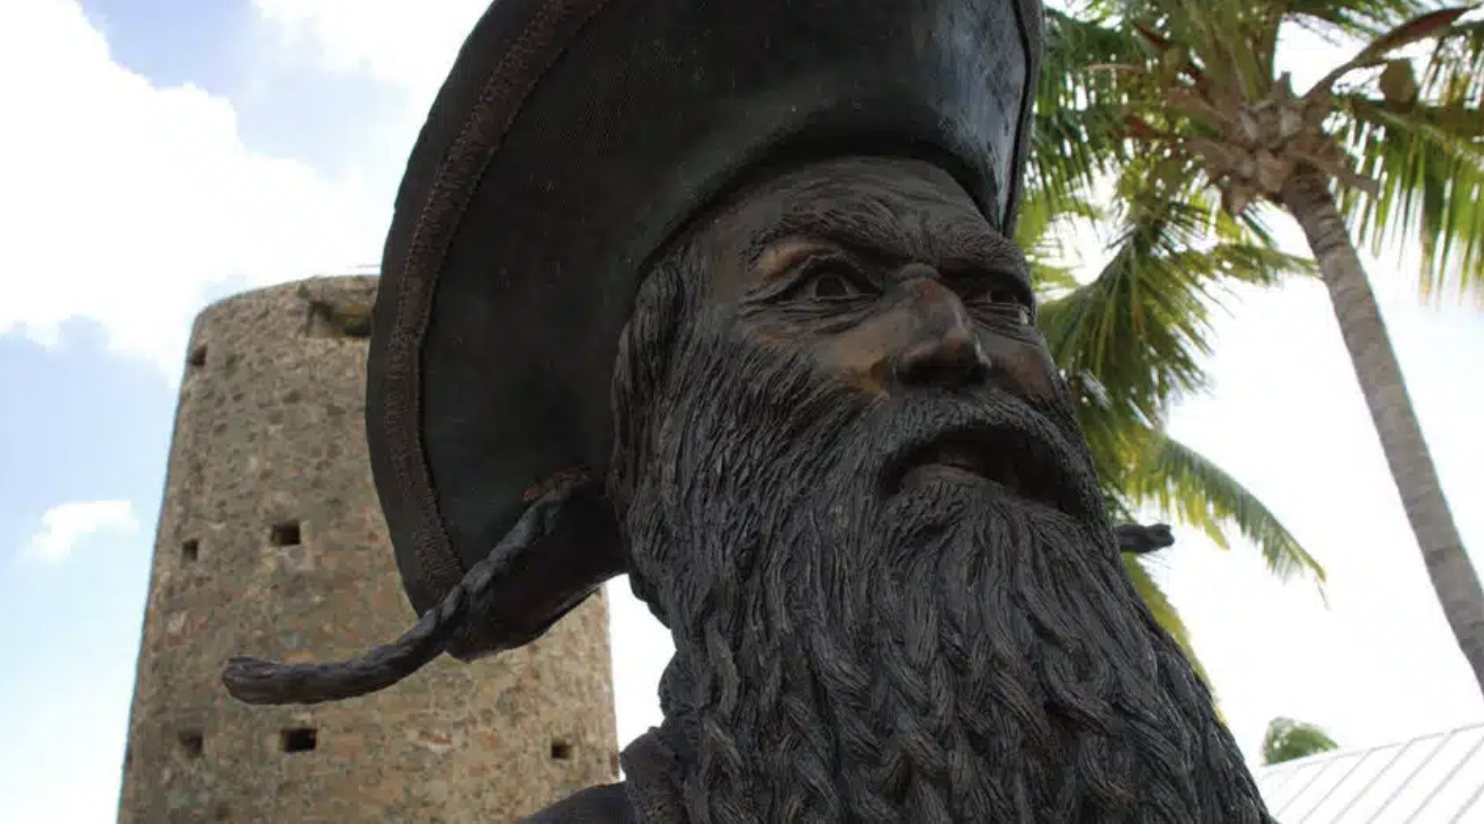 From Jamaica to St Thomas, Following the Trail of Caribbean Pirates